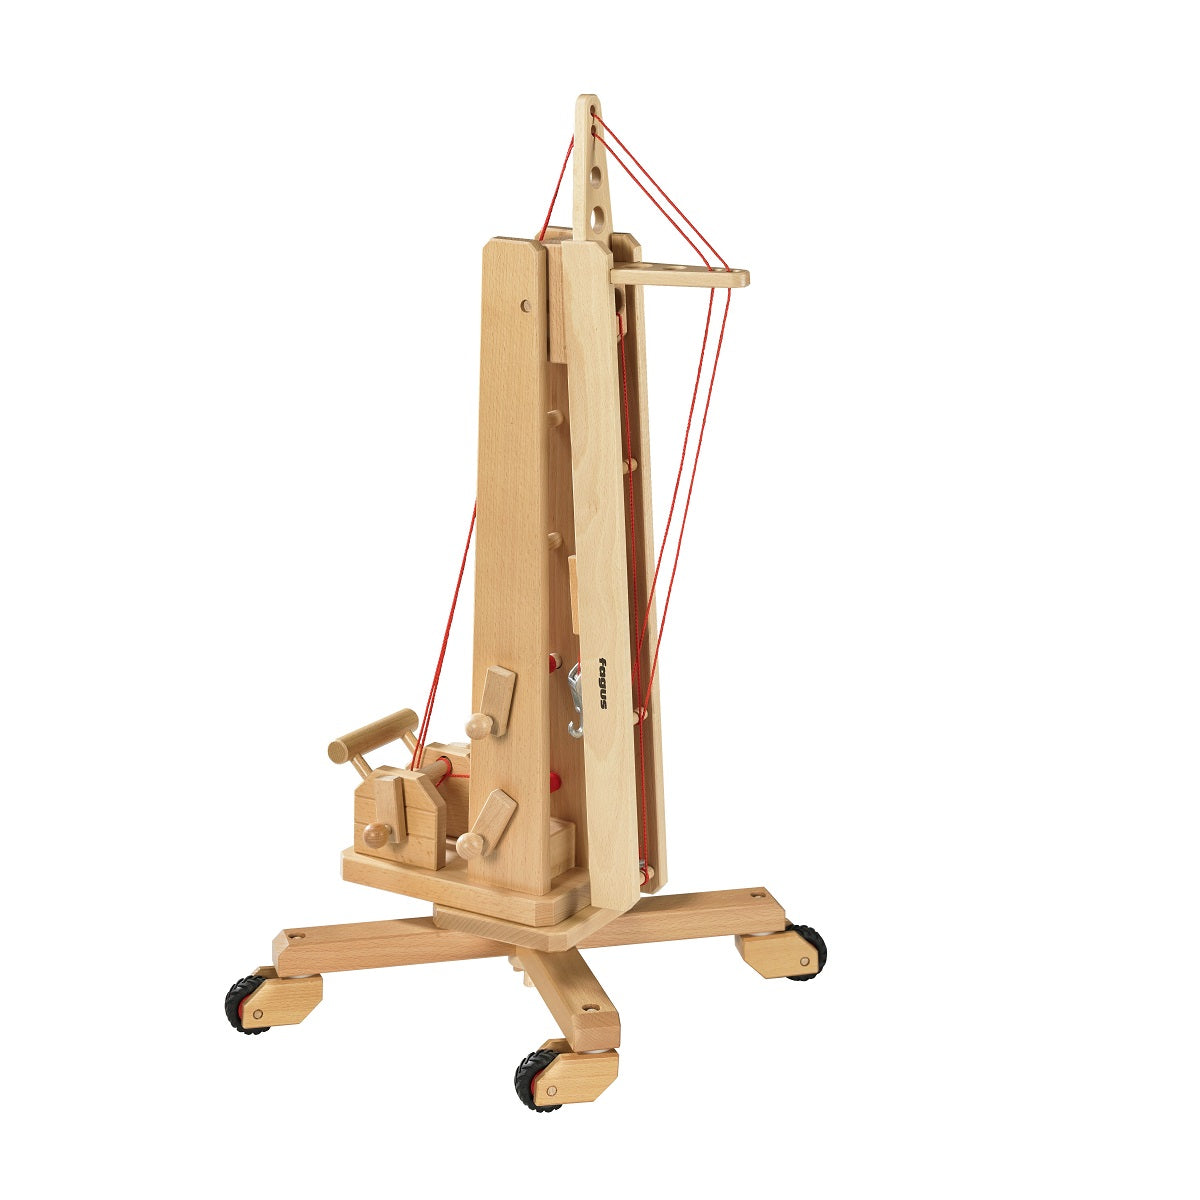 Fagus Crane - Wooden Play Vehicles from Germany